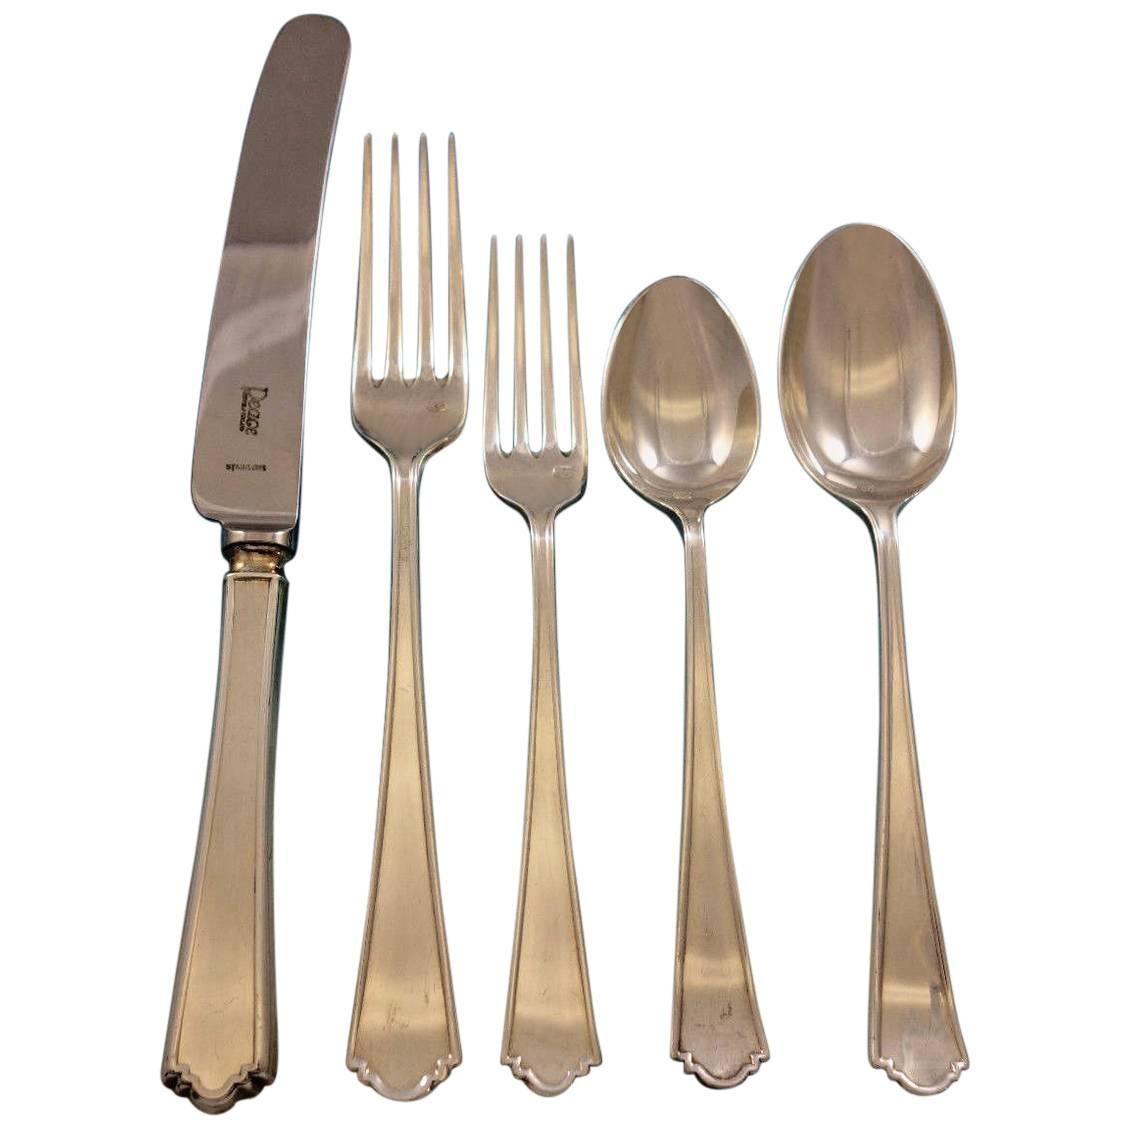 Katie by Samuel Peace English Silverplated Flatware Set for 12 Service 70 pcs